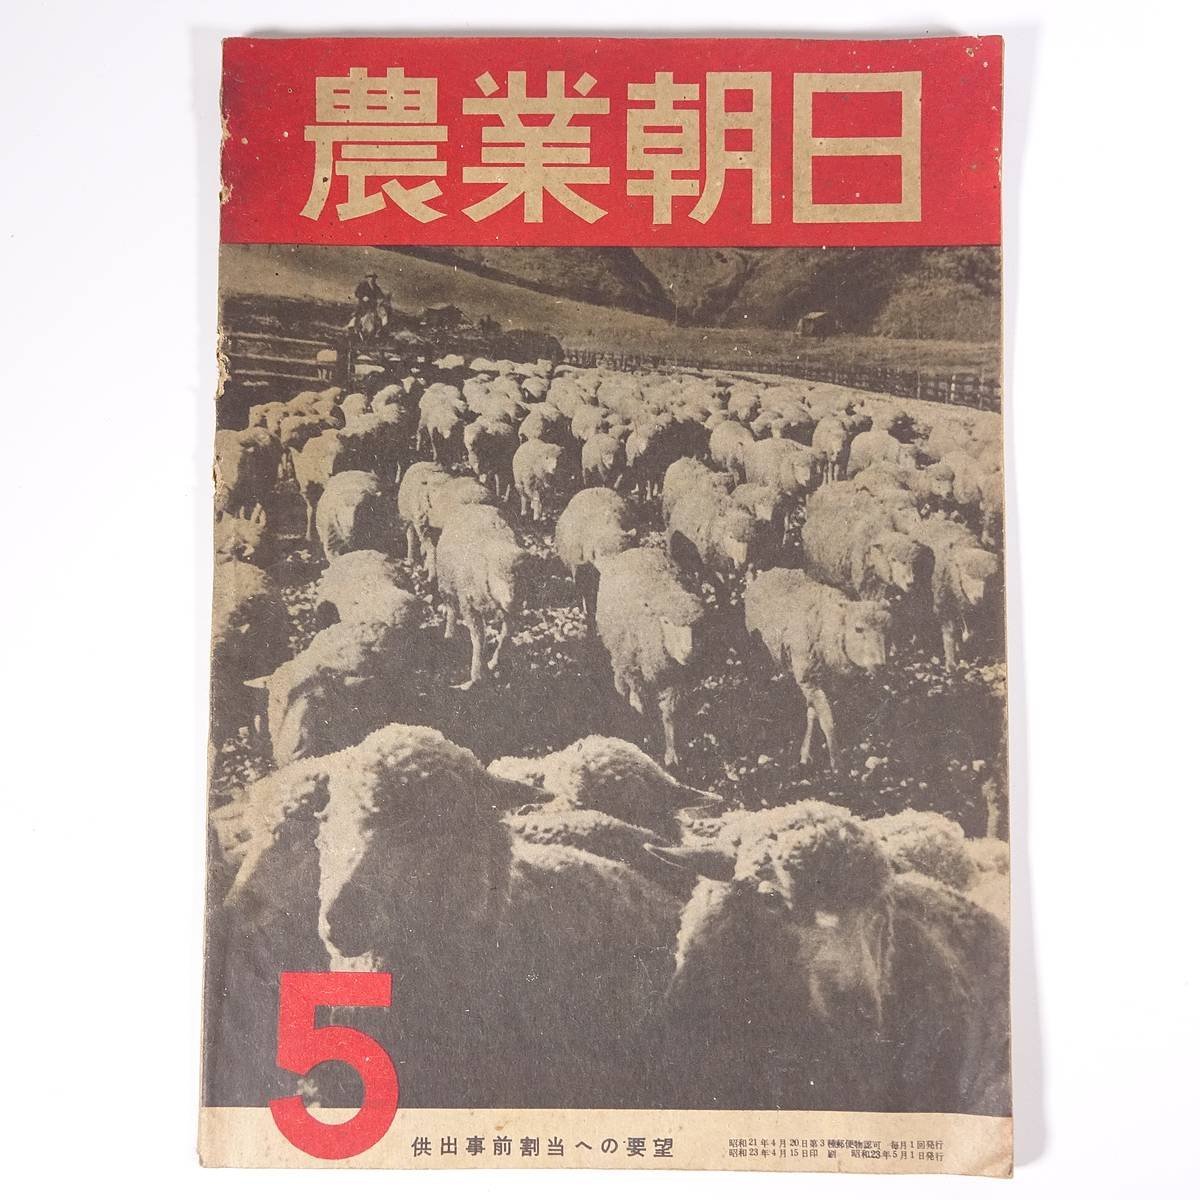  agriculture morning by day volume no. 29 number 1948/5 morning day newspaper Tokyo head office Showa era two three year 1948 old book magazine agriculture agriculture agriculture house special collection *.. beforehand break up present to demand another 